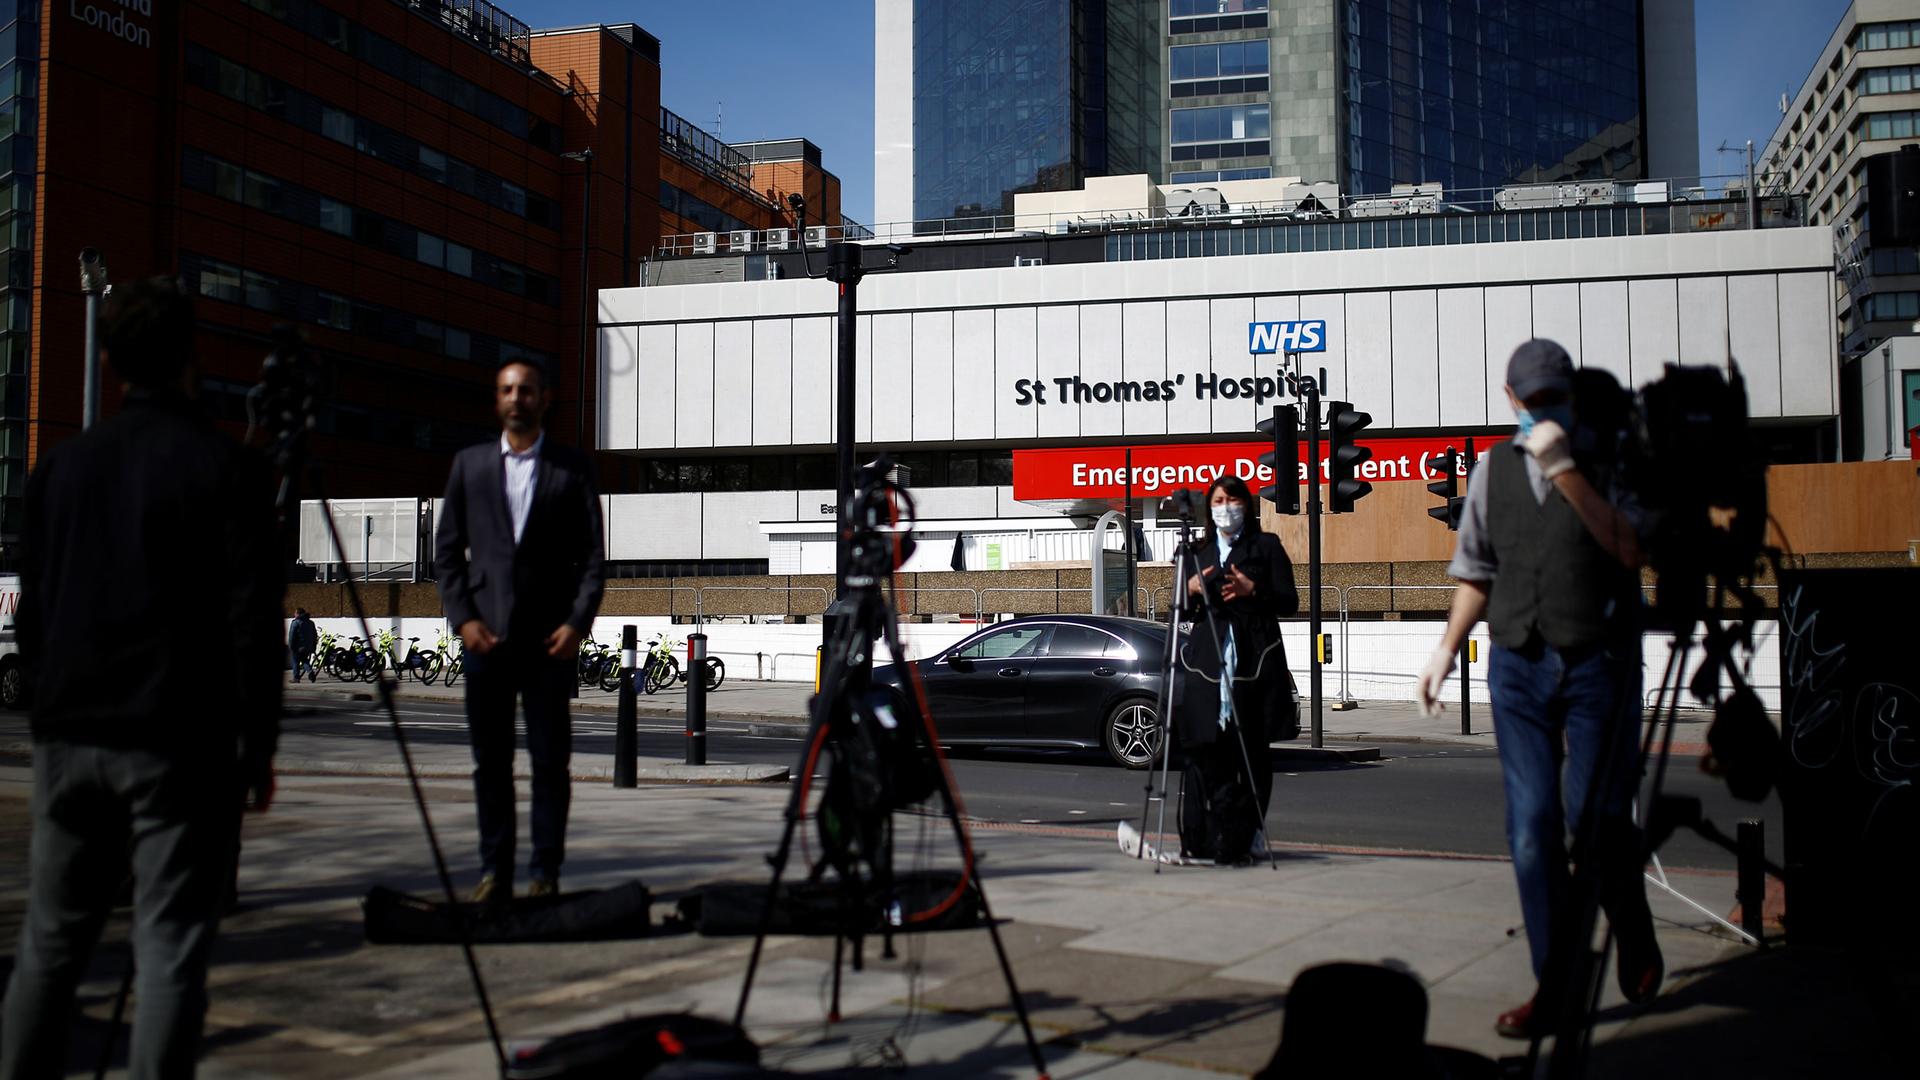 Several television cameras are shown set up with reporters standing in front and St Thomas' Hospital in the background.